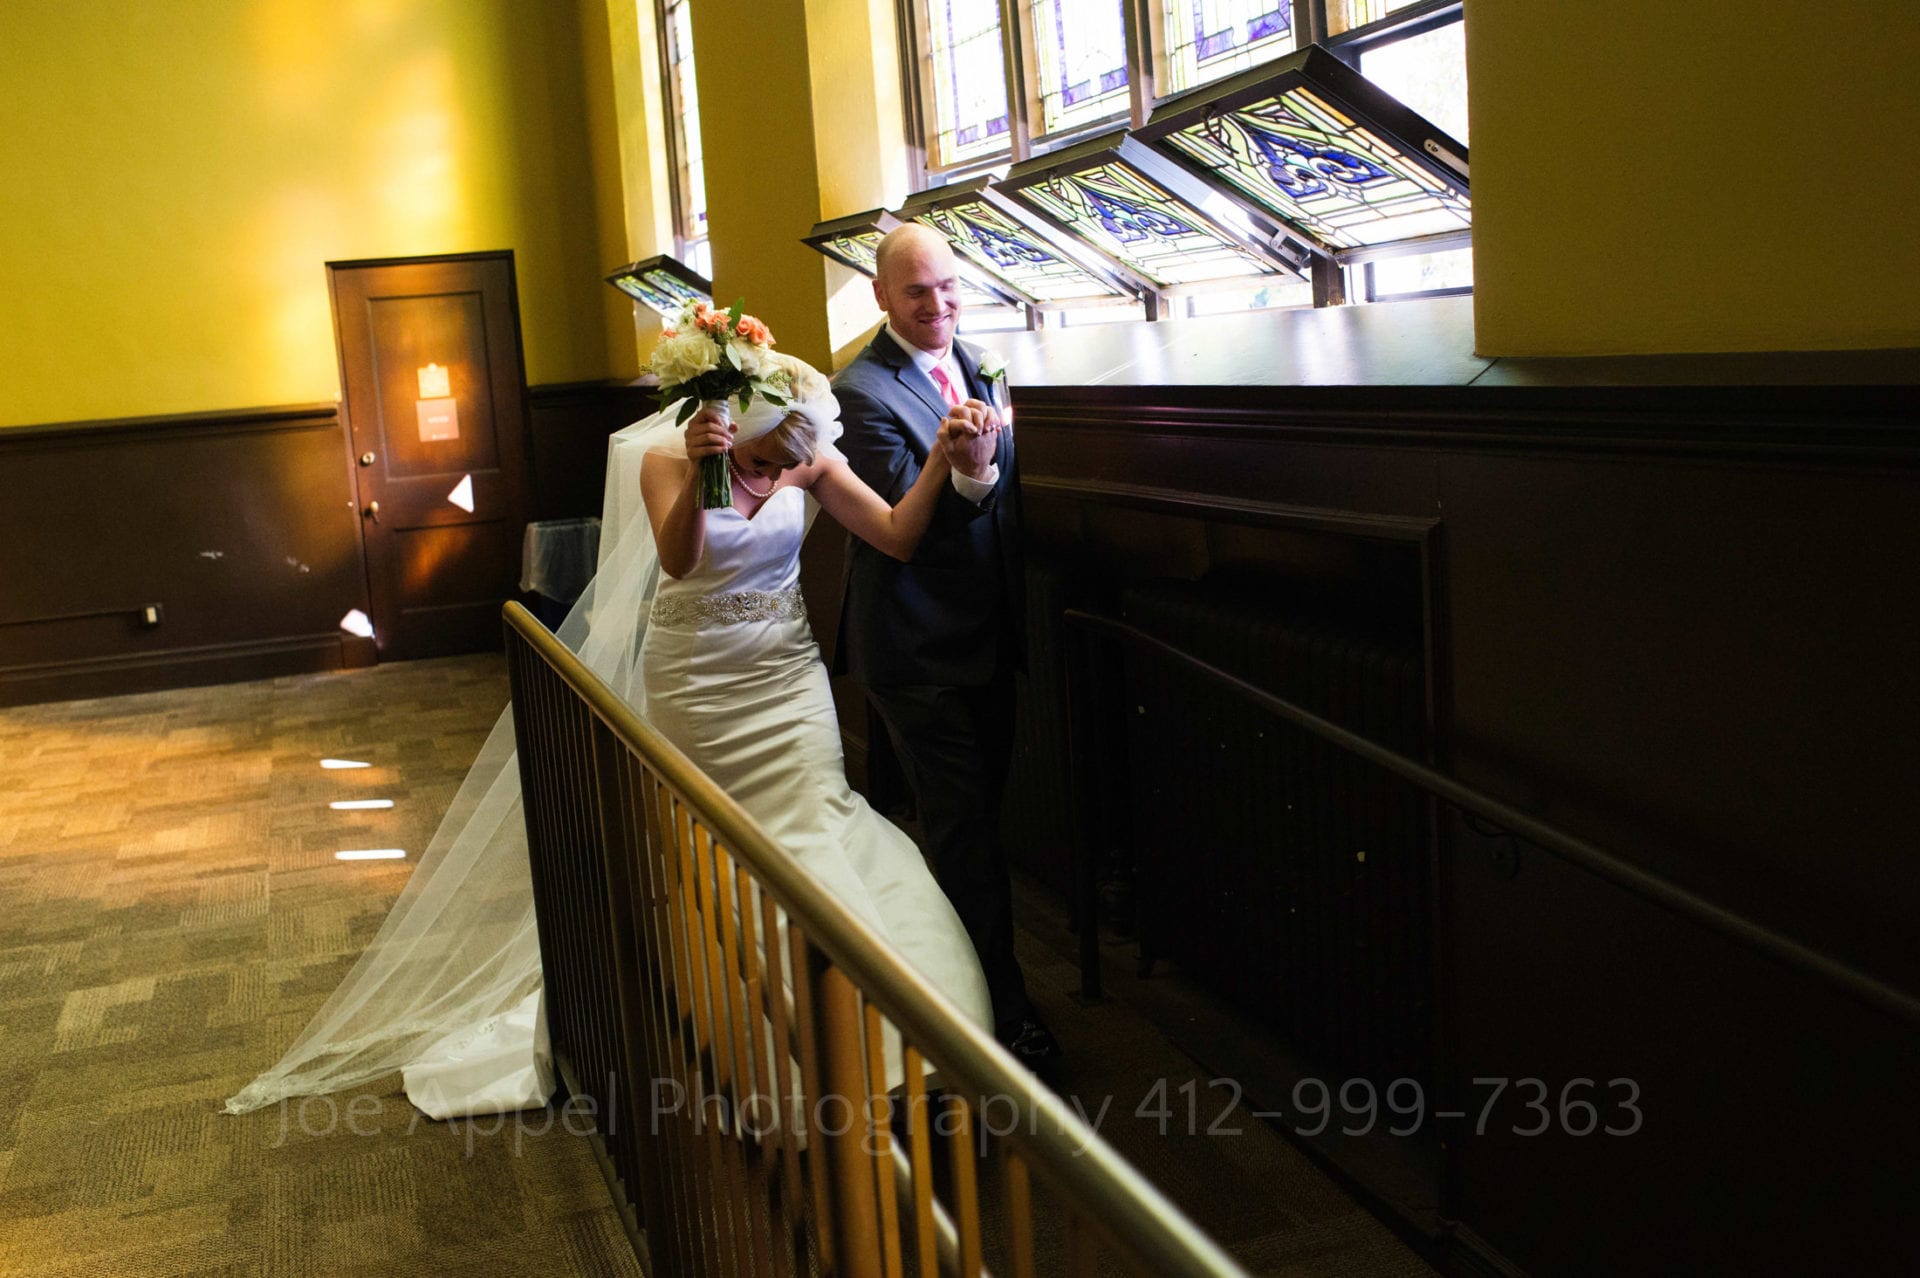 A bride and groom hold their hands up in celebration as they walk down a ramp near some stained glass windows in the big yellow room at the Union Project in Highland Park.